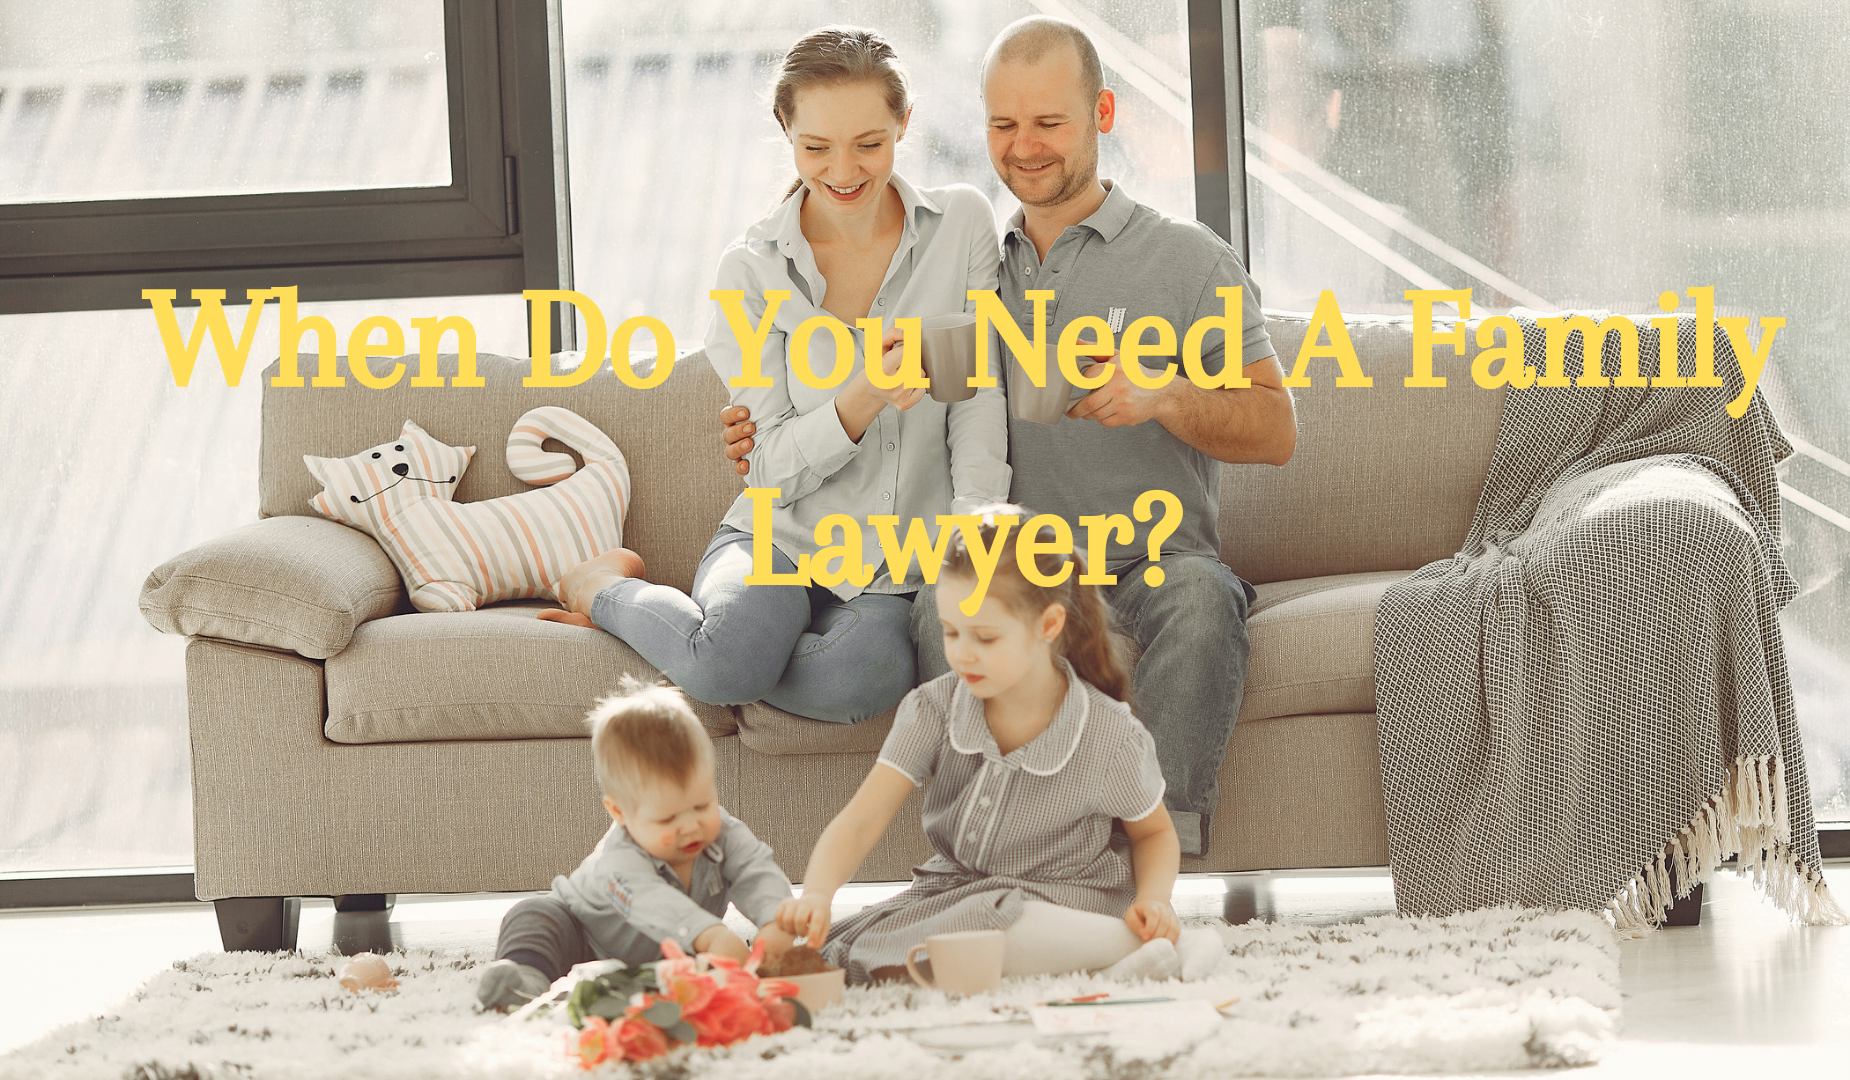 When Do You Need A Family Lawyer?